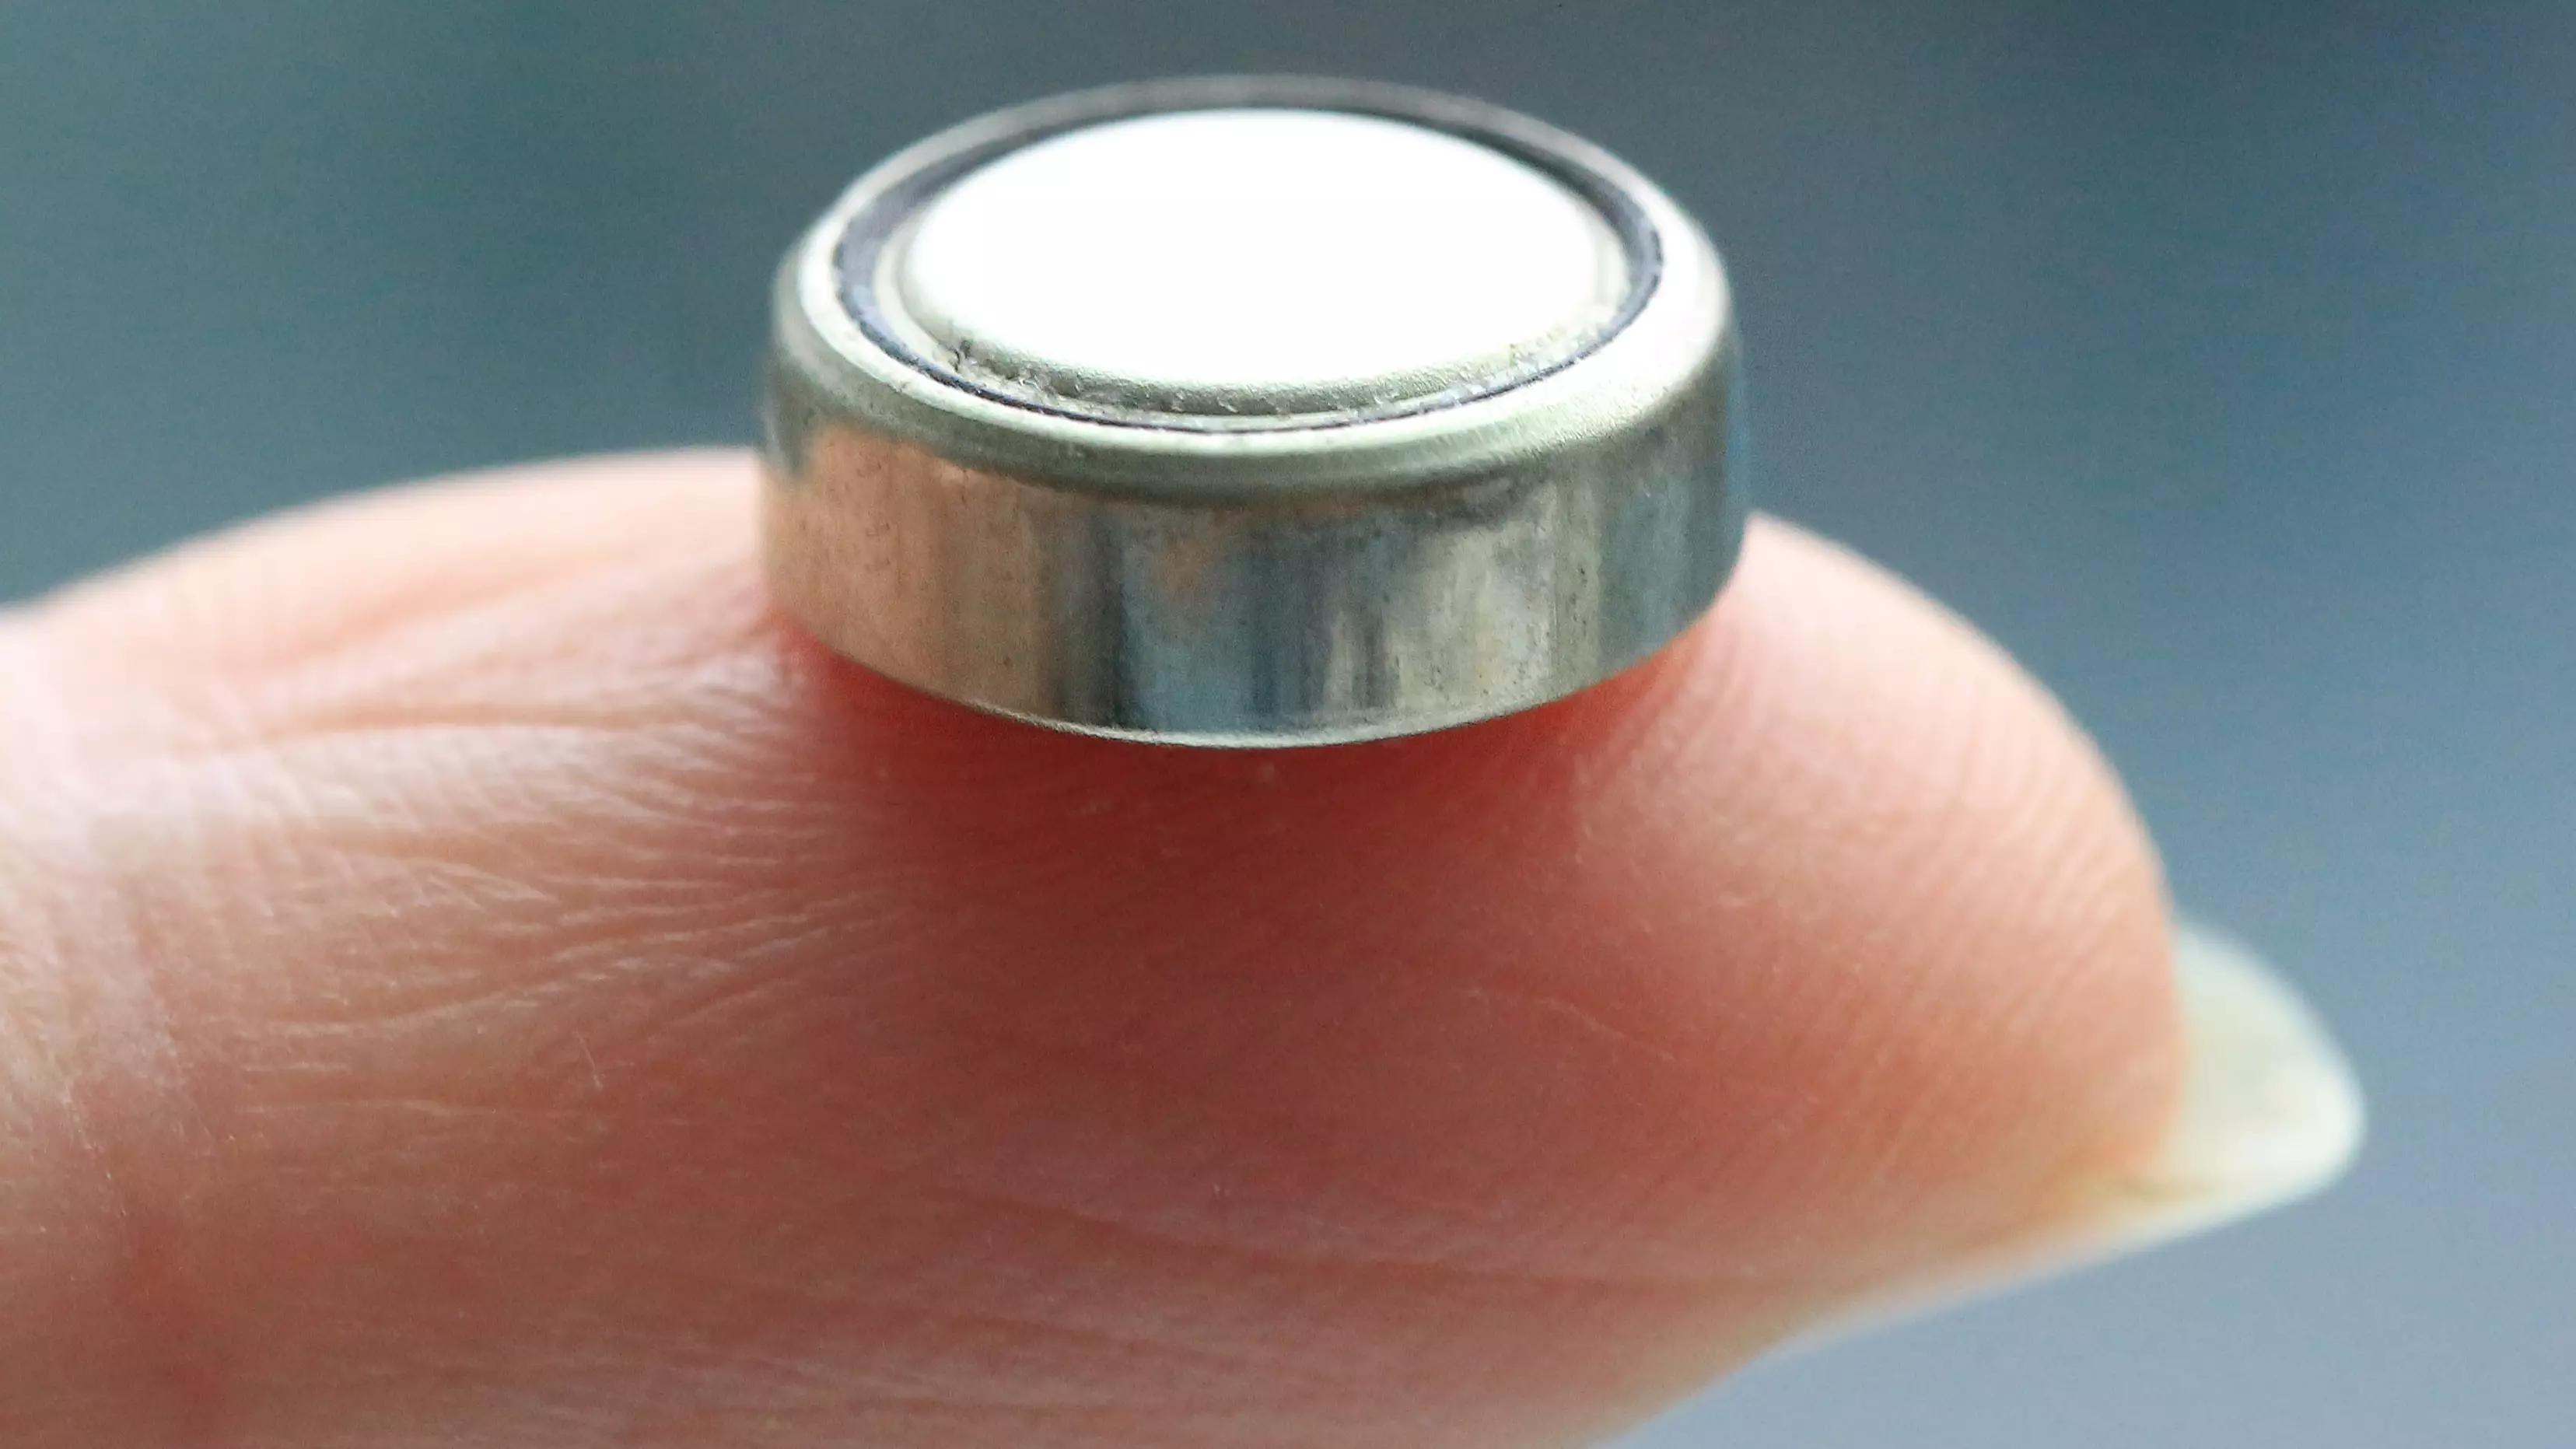 Here's What Happens When A Child Swallows A Button Battery